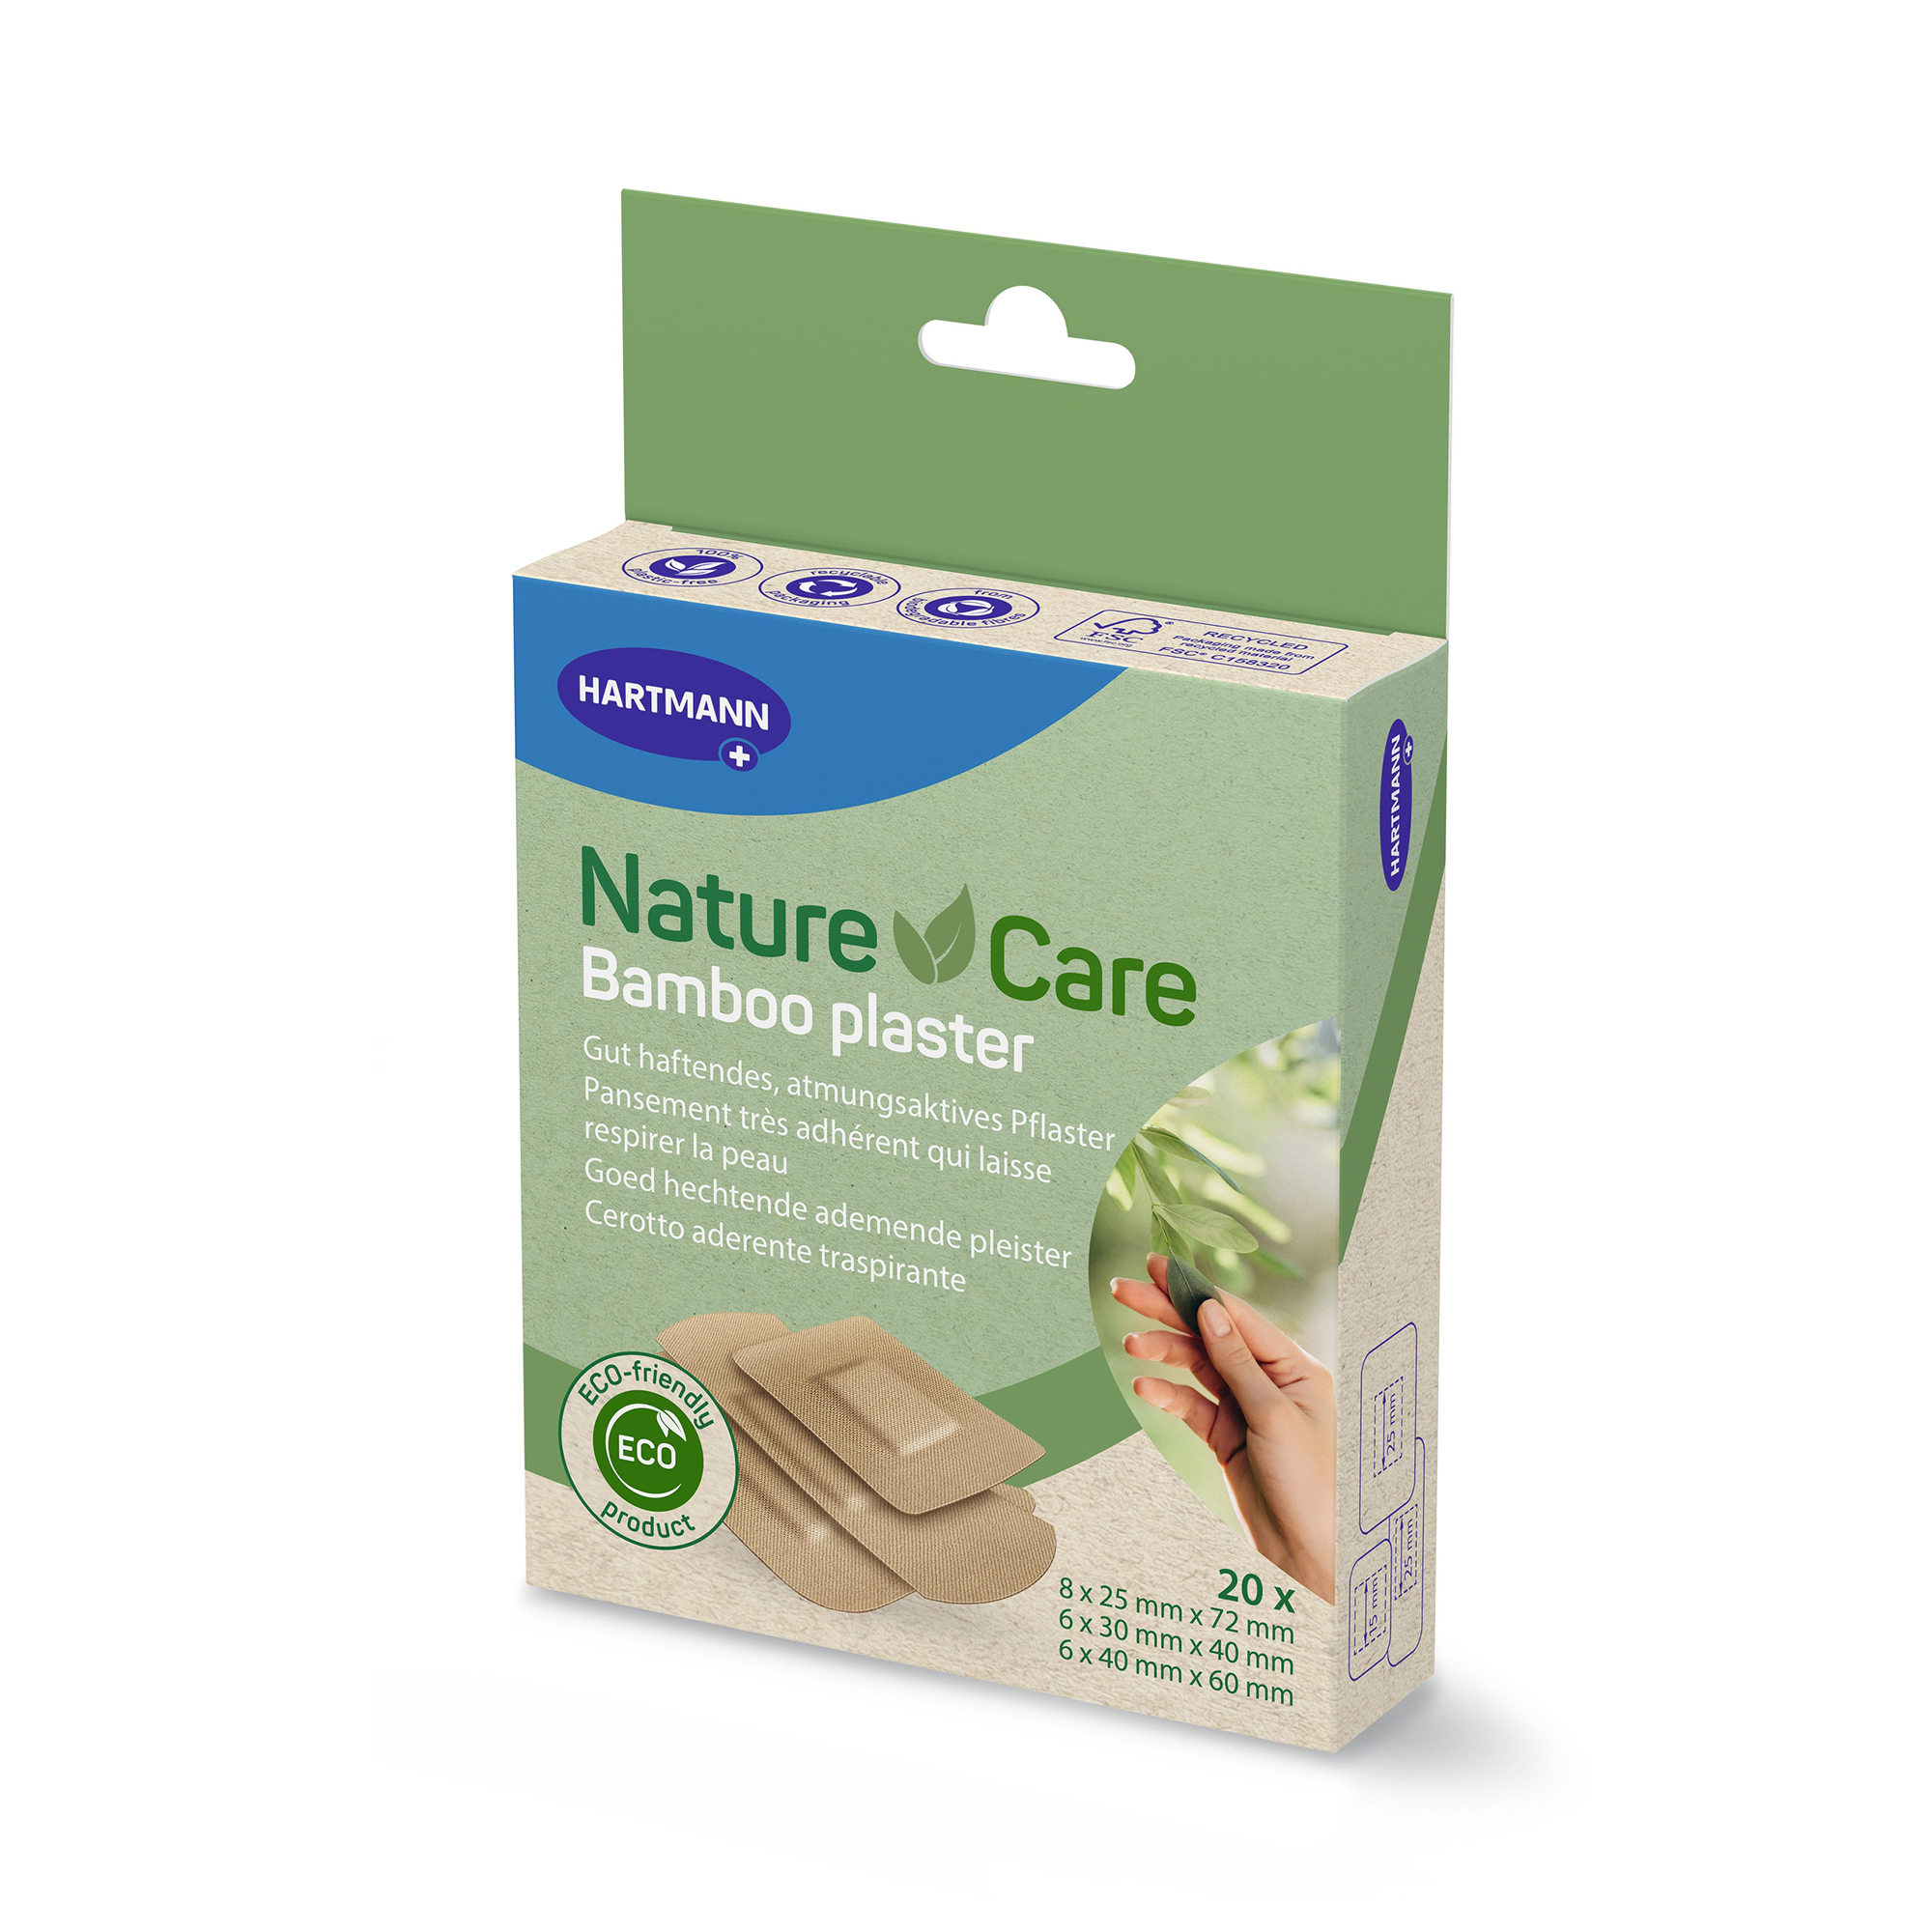 Hartmann Nature Care, Bamboo plaster strips in 3 different sizes, in a folding box